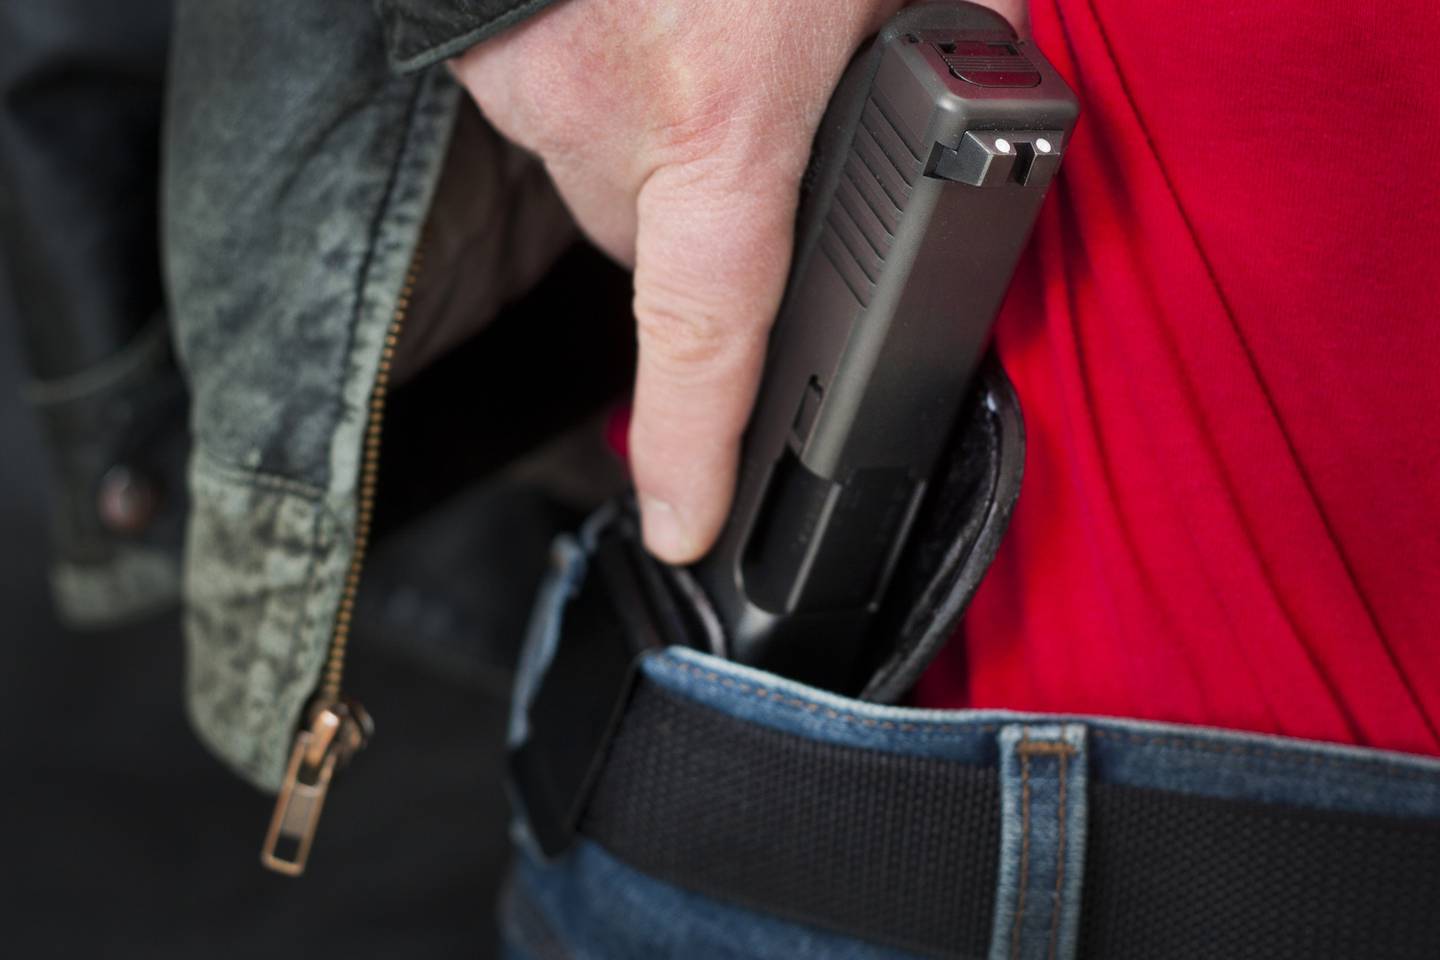 A caucasian man drawing his modern polymer (Glock) .45 caliber pistol from an IWB (inside the waistband) holster under his leather jacket.